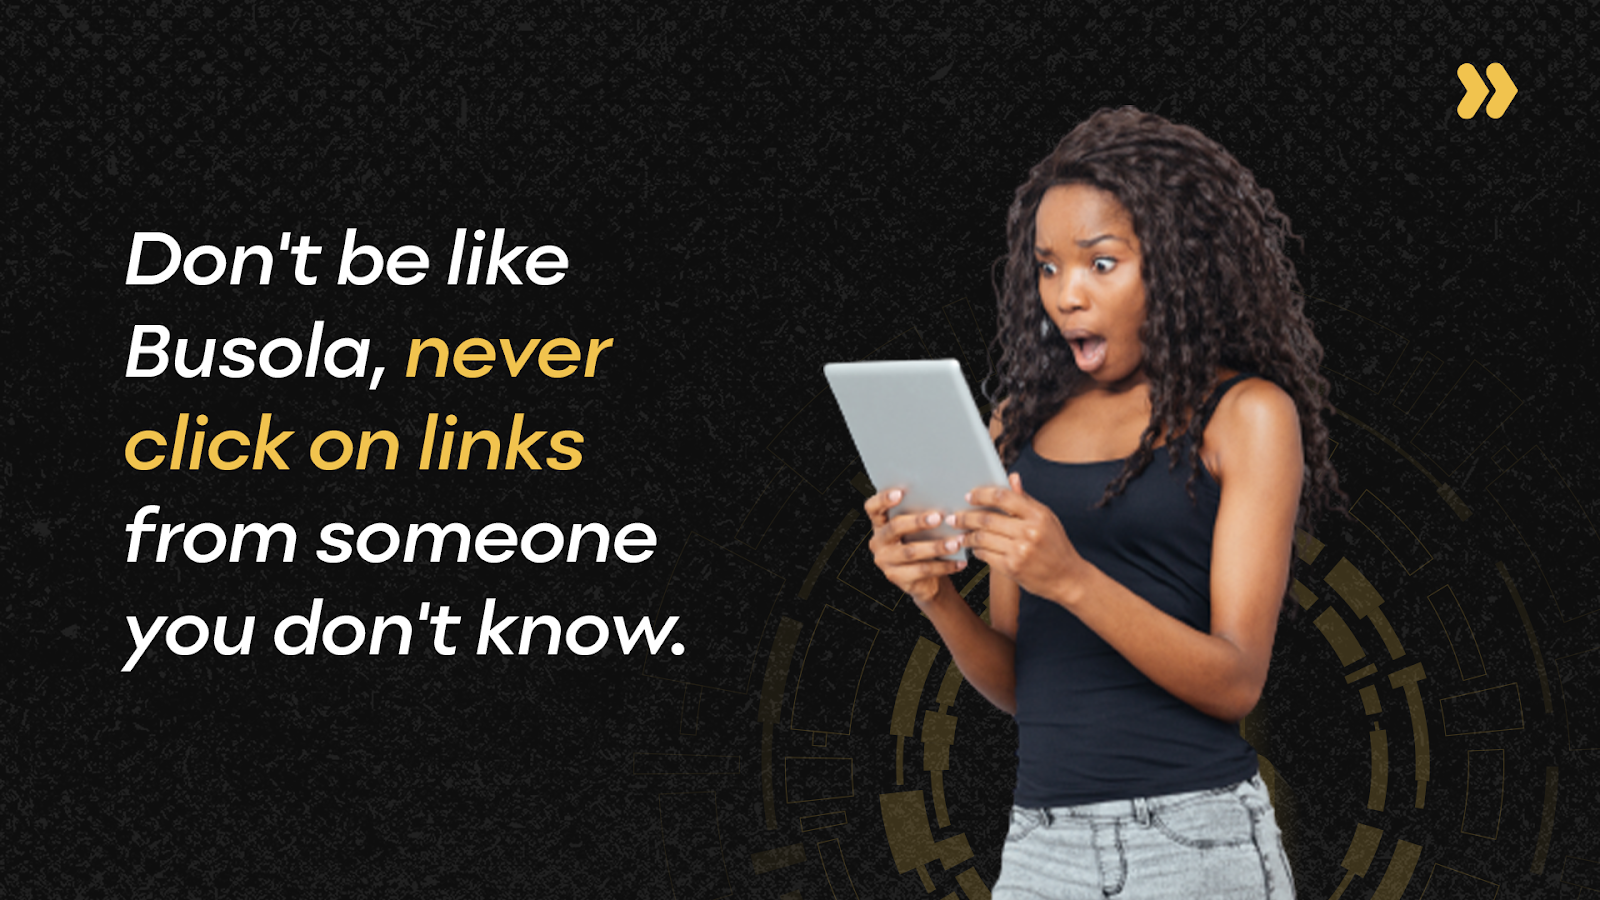 Don't click on links from someone you don't know